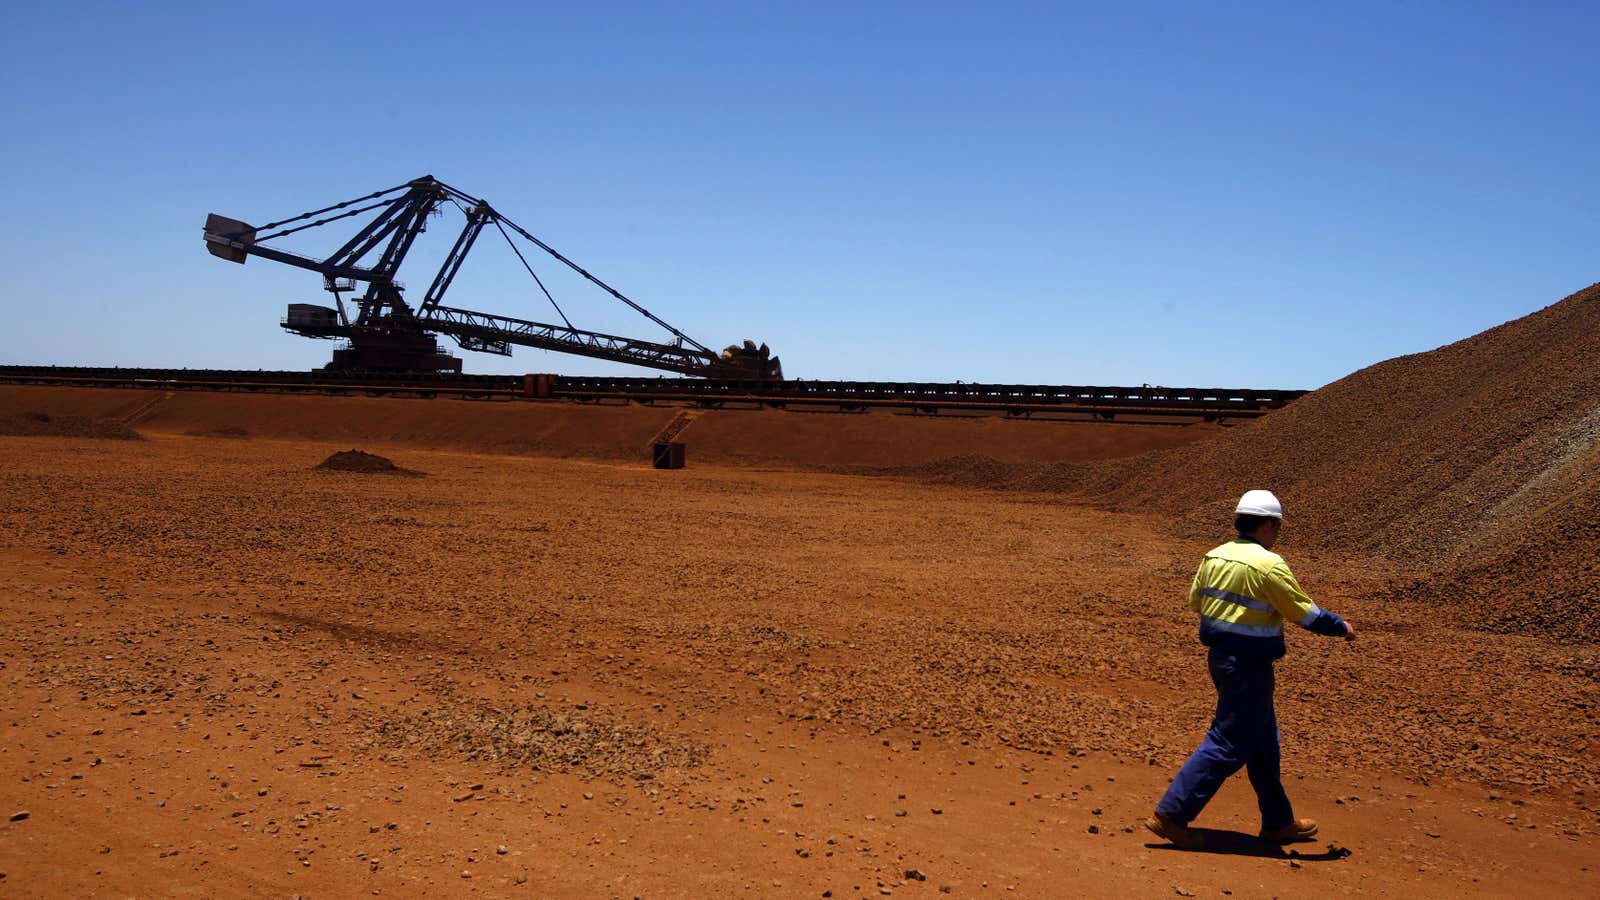 A decline in mining investment has been a drag of late.